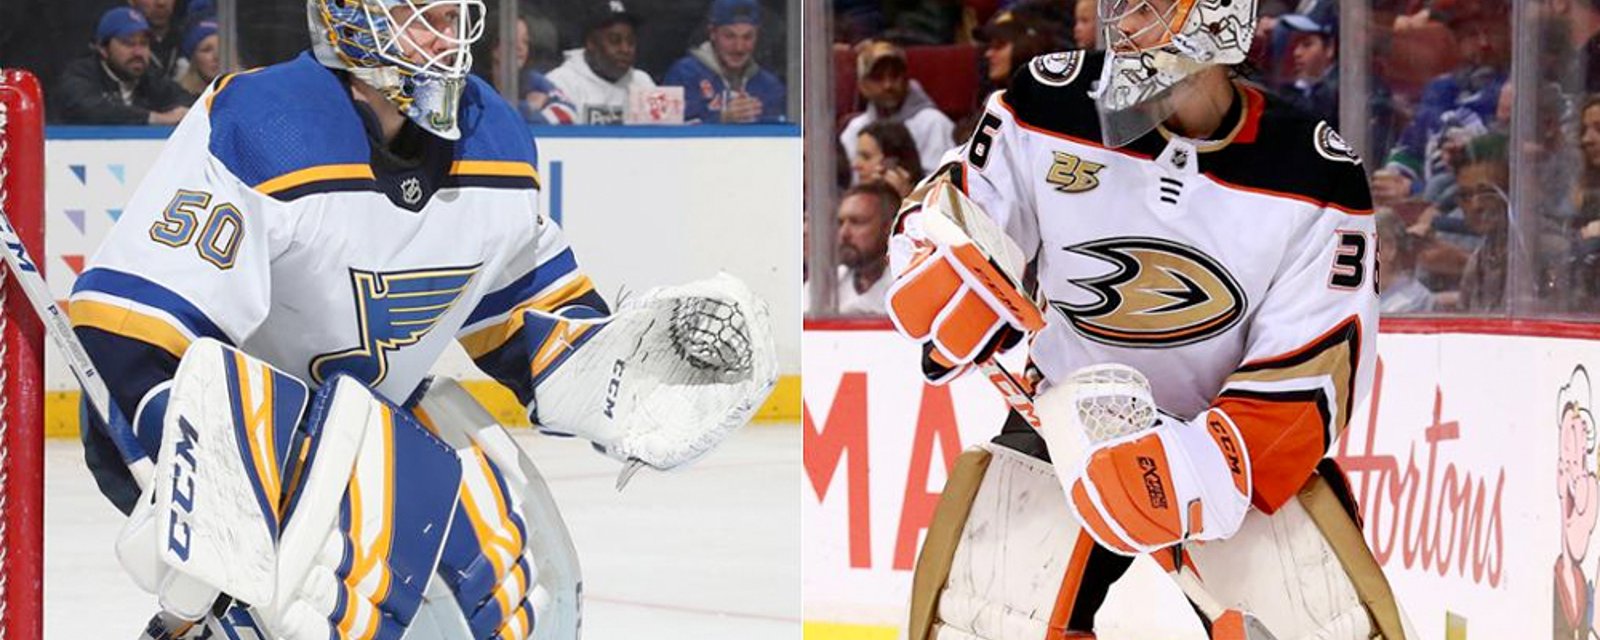 NHL Network fails miserably in ranking the top 10 goalies 